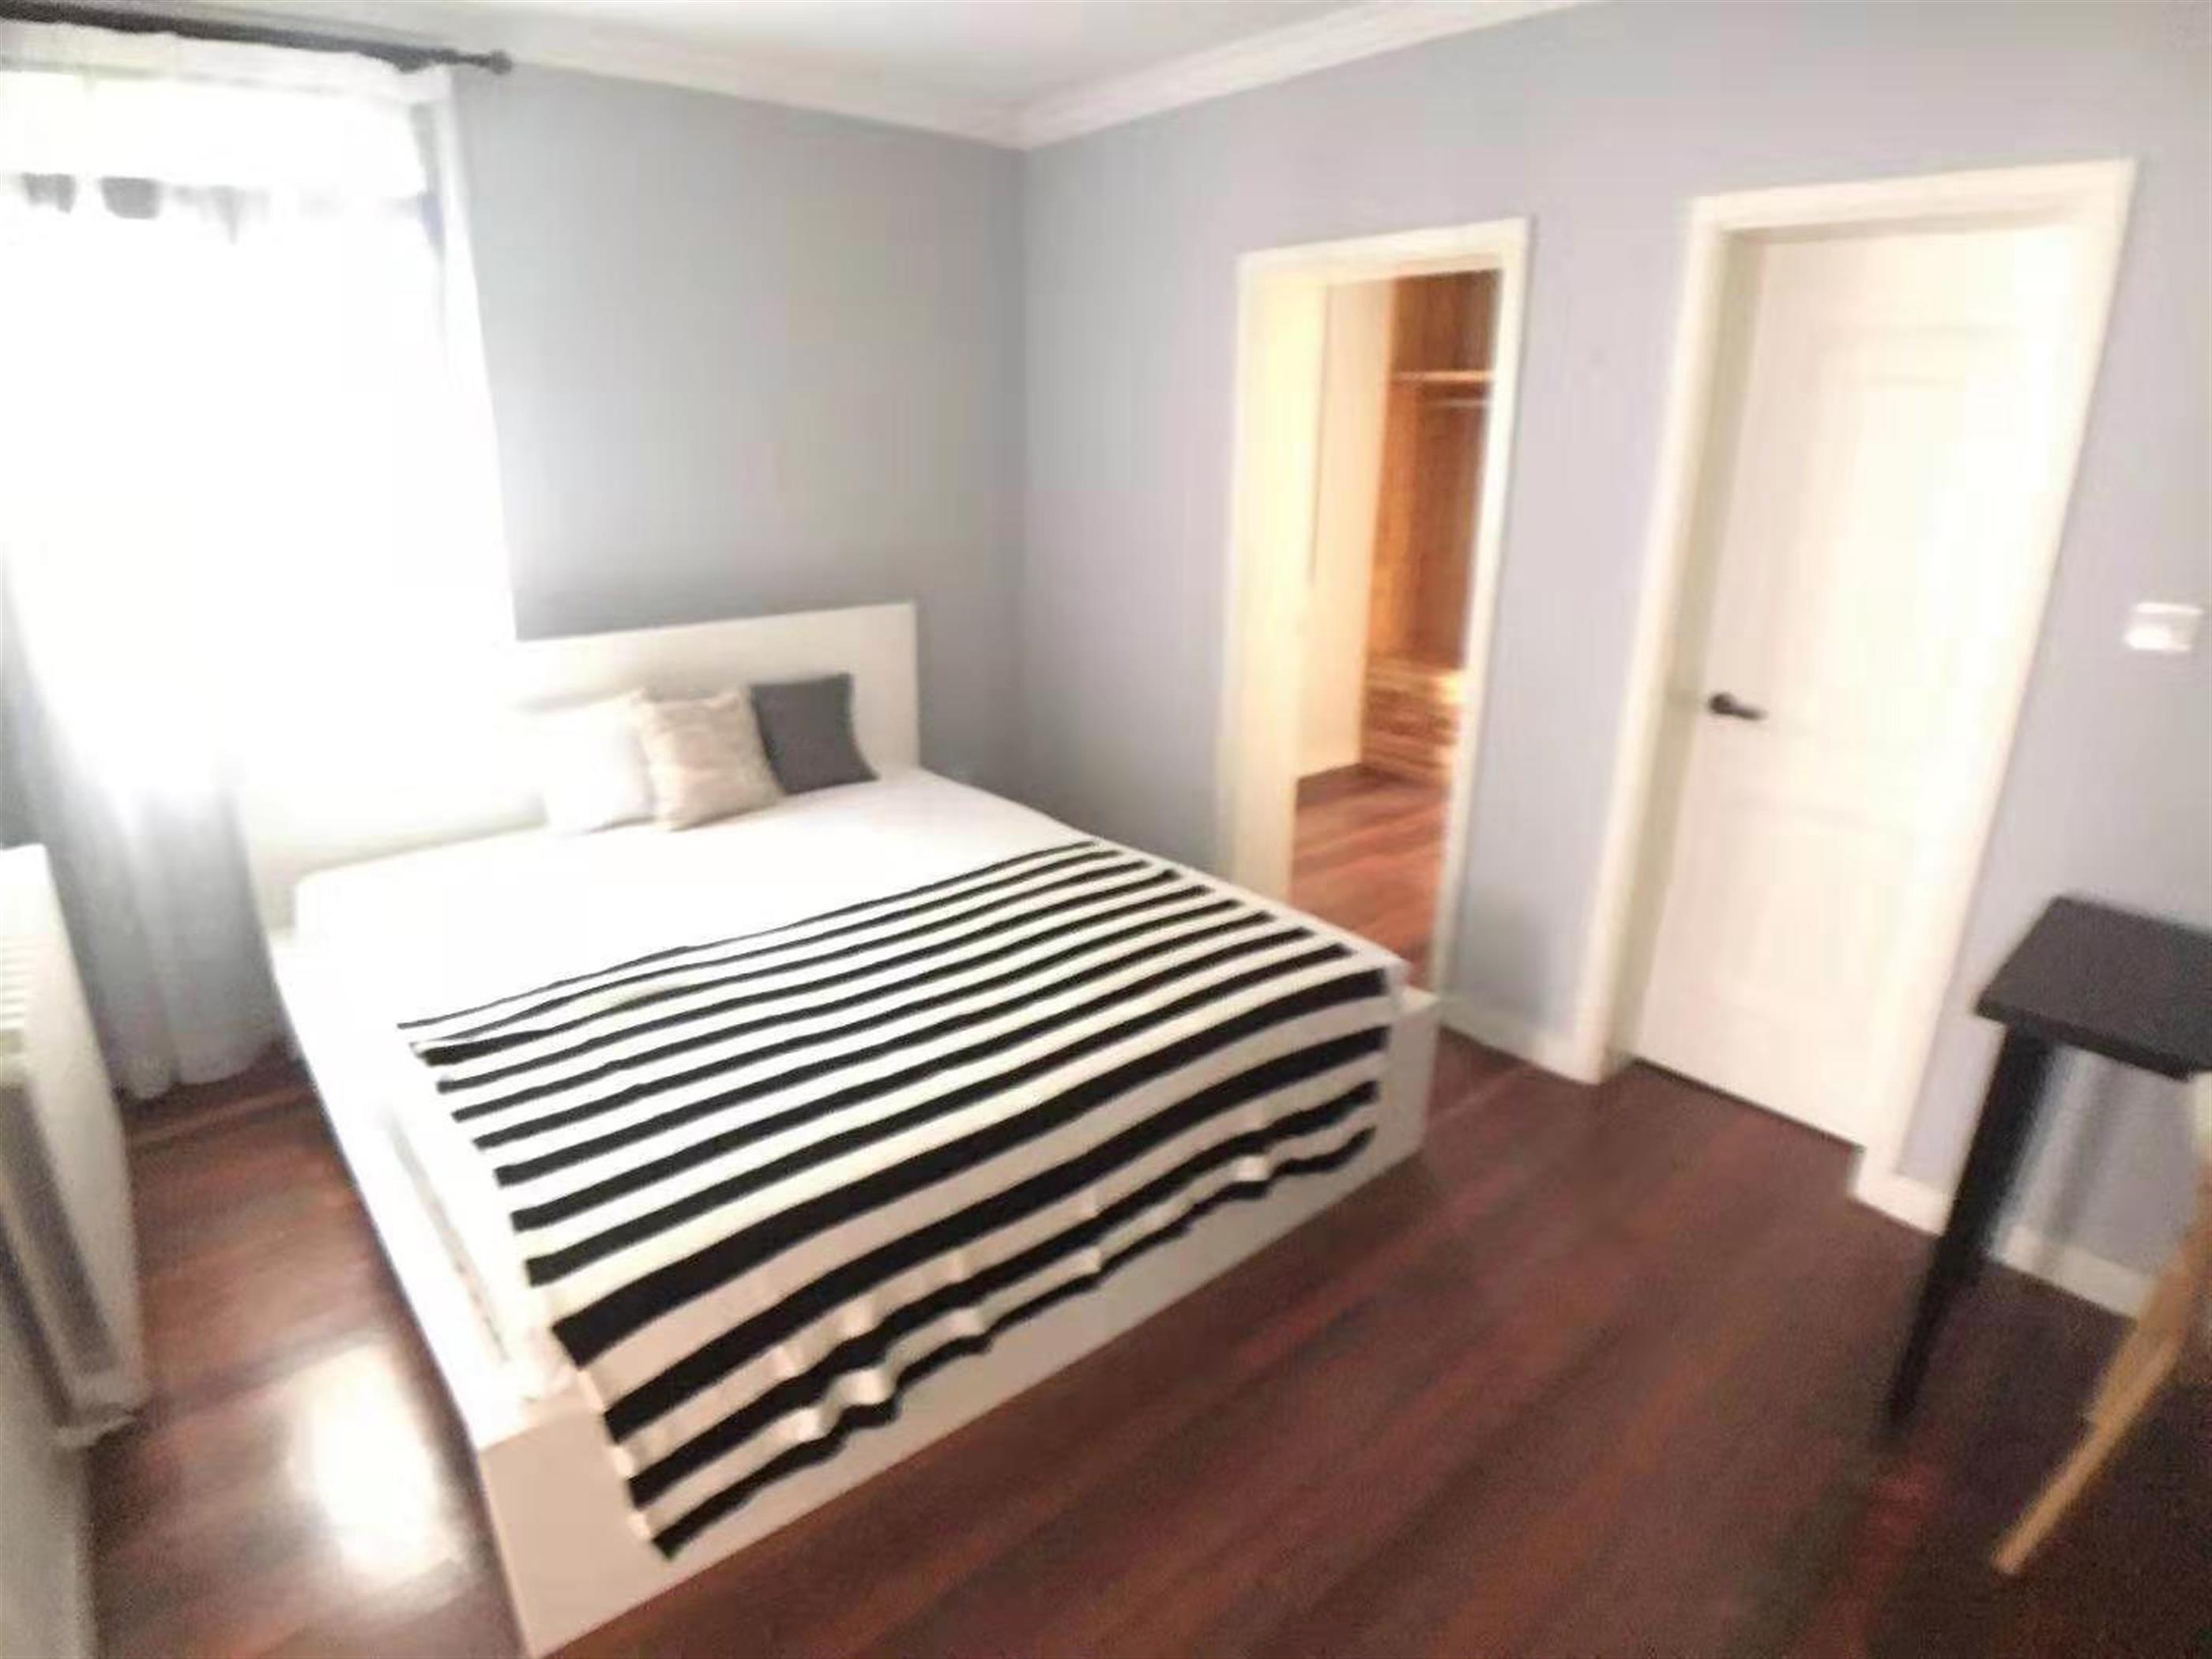 Bright bedroom Bright Cozy 1F 2BR FFC Lane House Apt for Rent LN10